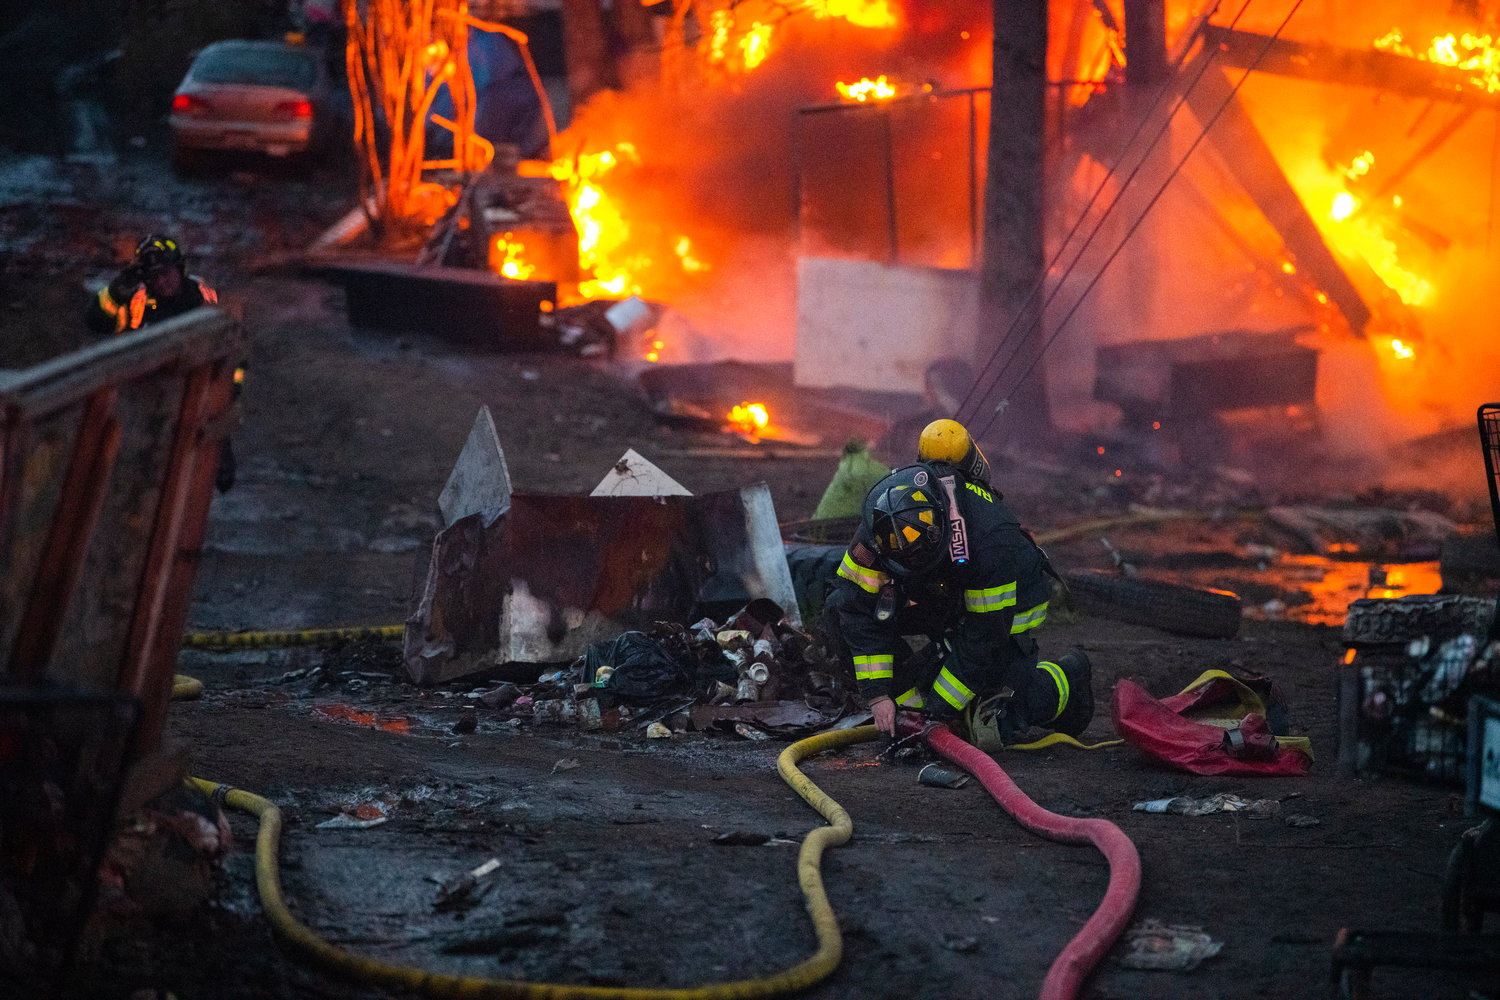 Firefighters stretch and link hoses to reach a burning structure inside a homeless encampment near Blakeslee Junction as flames consume debris Tuesday, March 28, 2023.